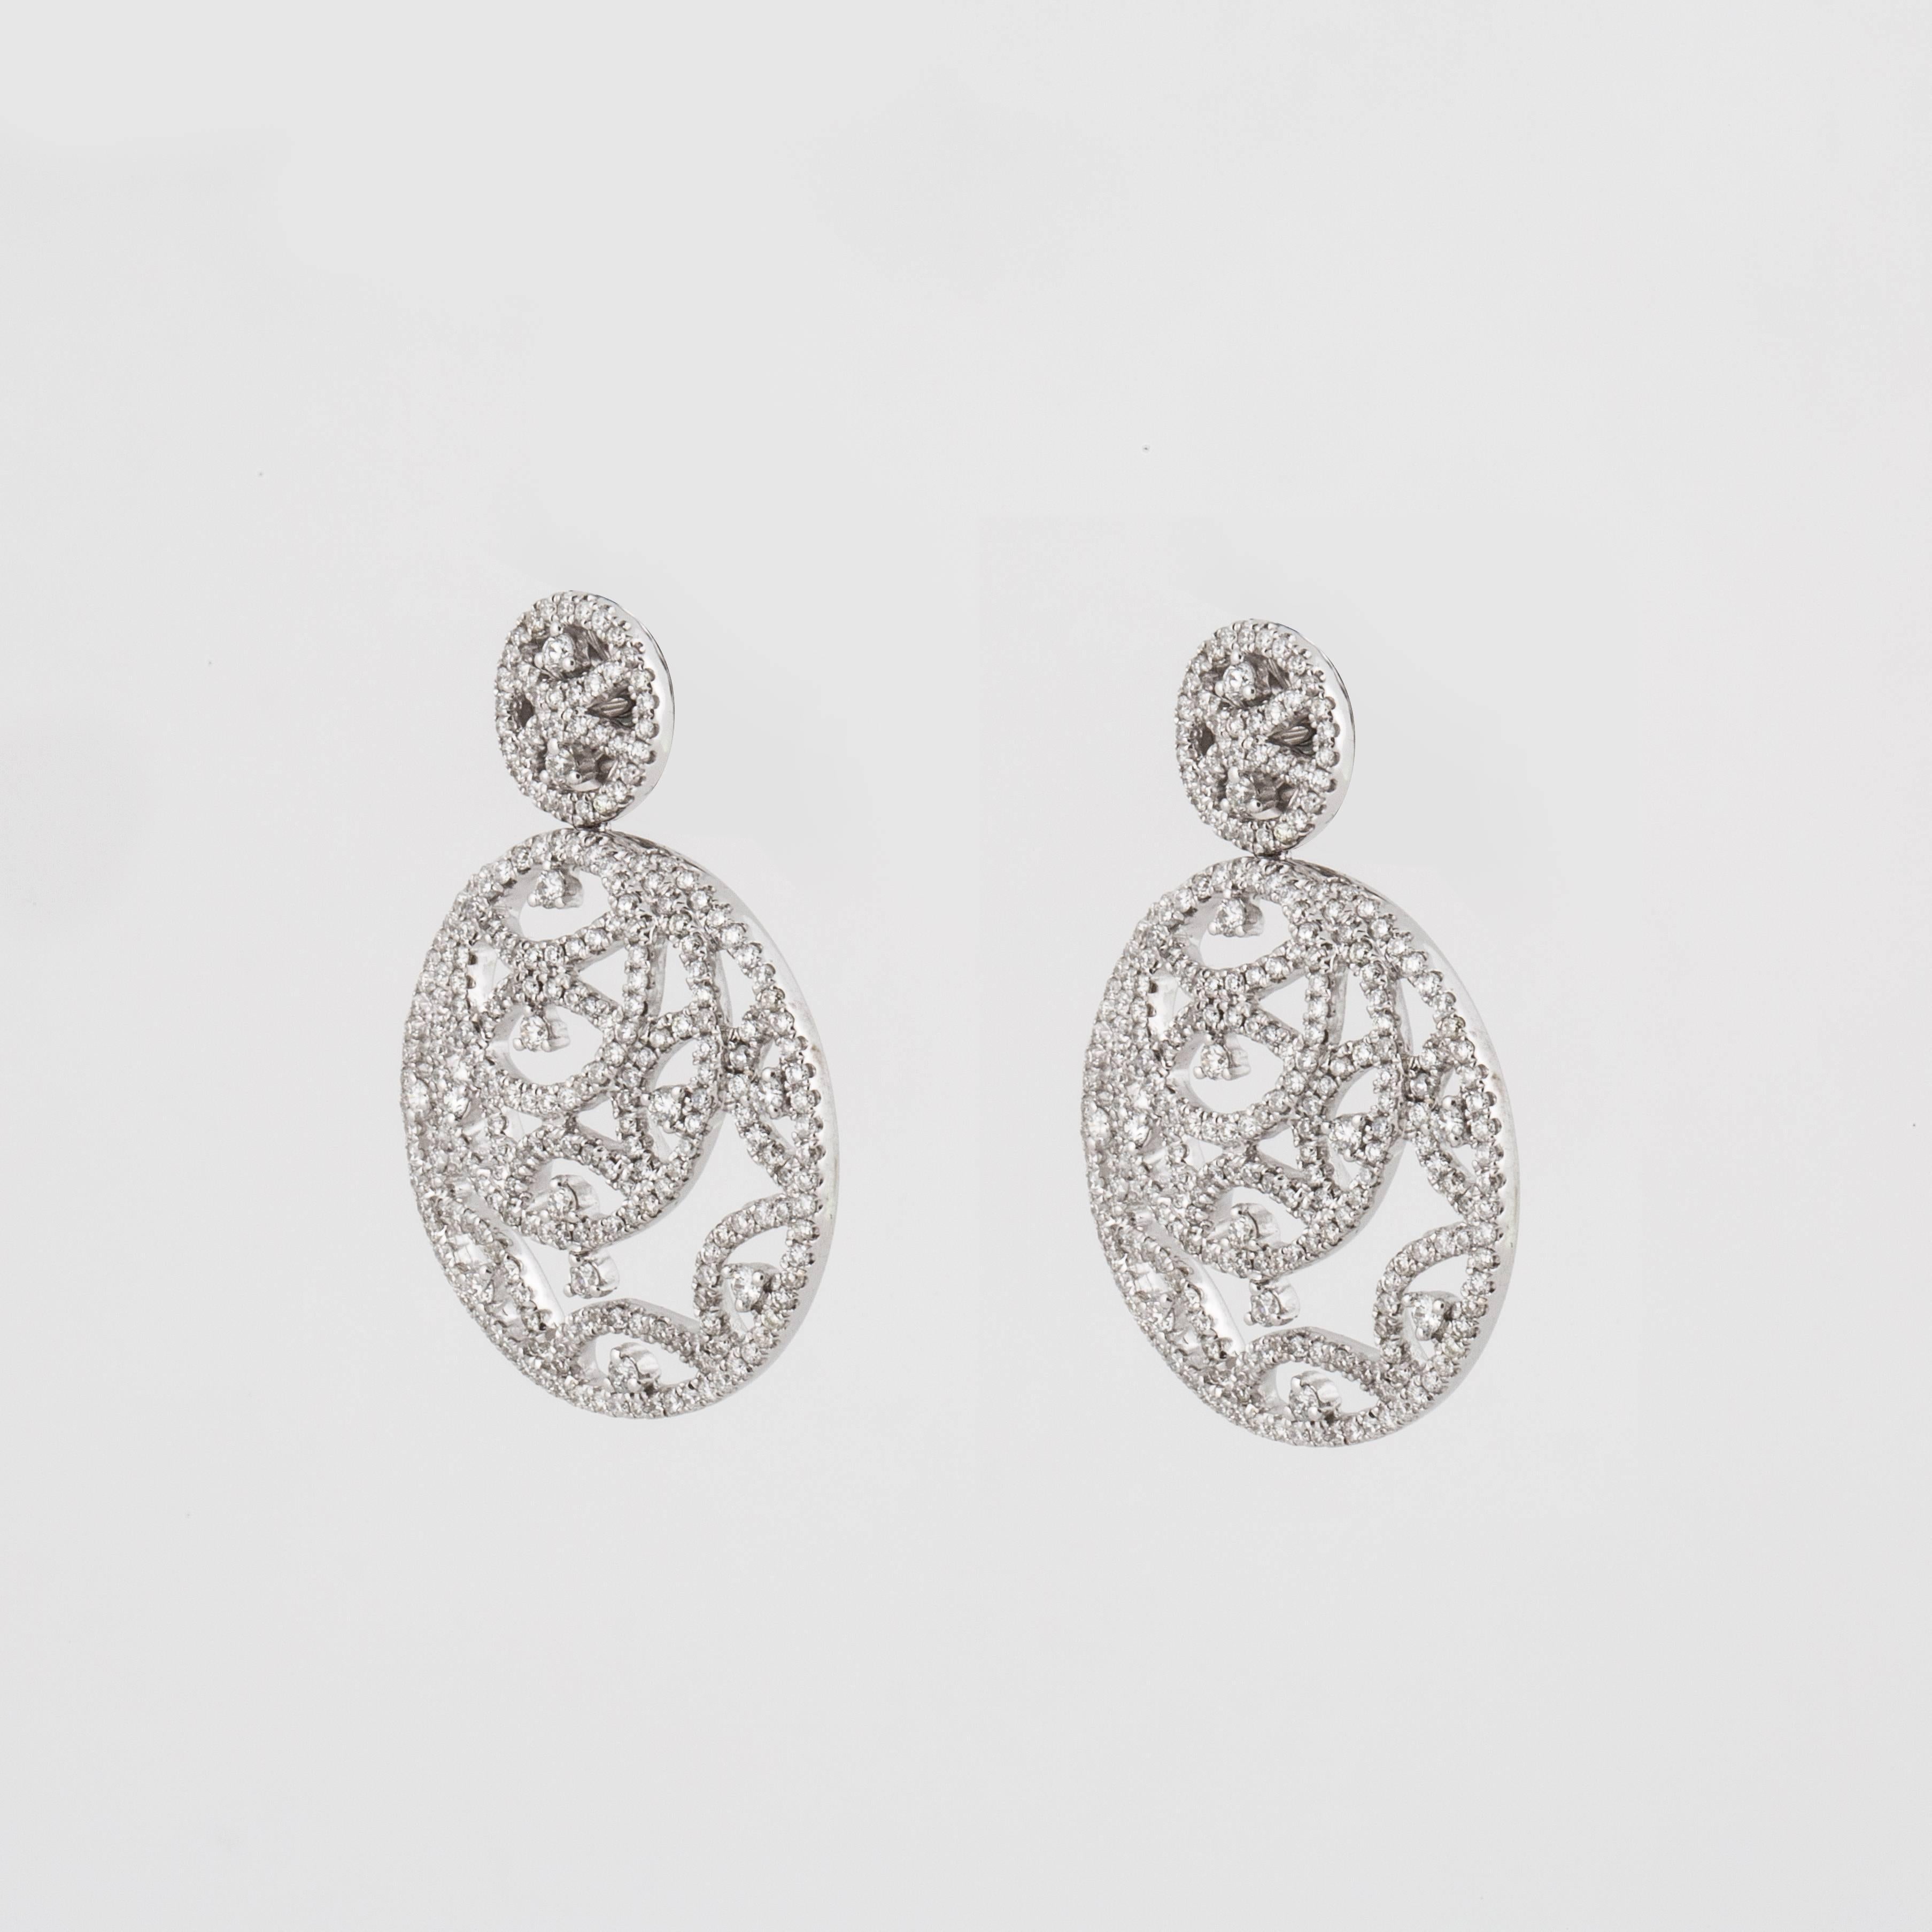 Openwork diamond earrings composed of 18K white gold.  The openwork circles are encrusted with 526 round diamonds that total 2.45 carats, G-I color and VS2-SI2 clarity.  They measure 1 3/16 inches long and 7/8 inches wide.  They are for pierced ears